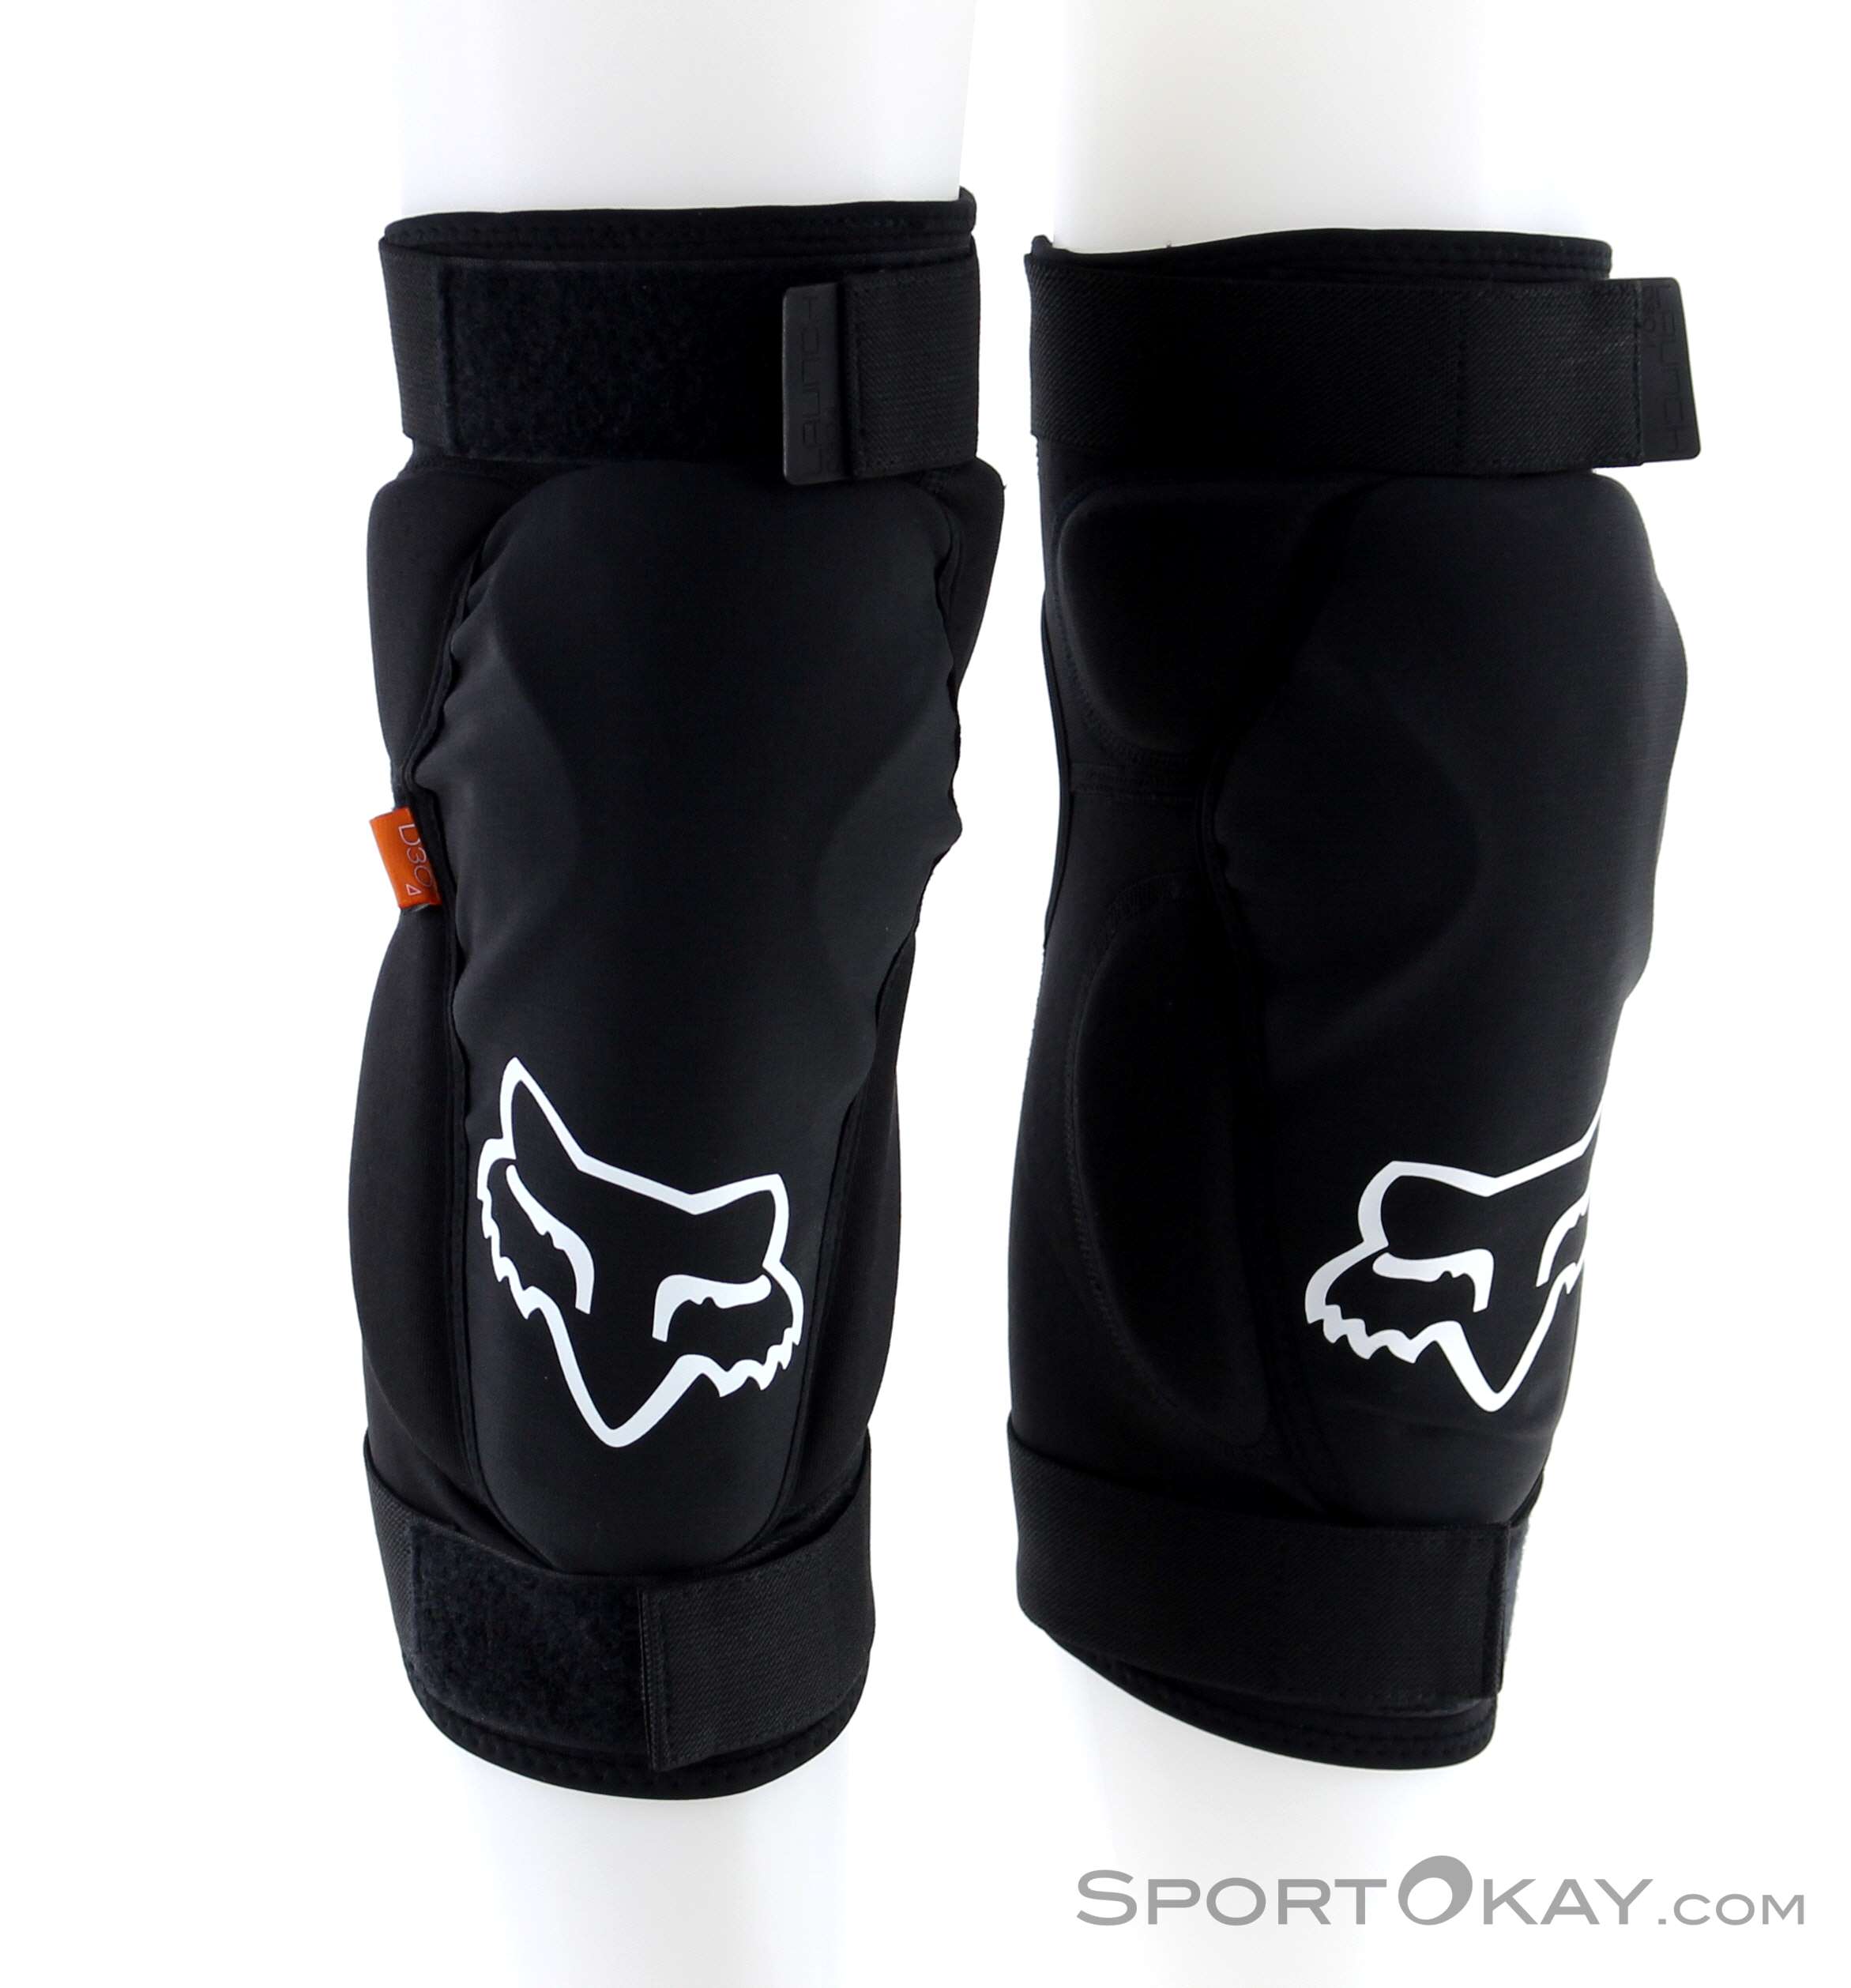 Details about   Fox Racing Launch D3O Knee Guards Black Medium 